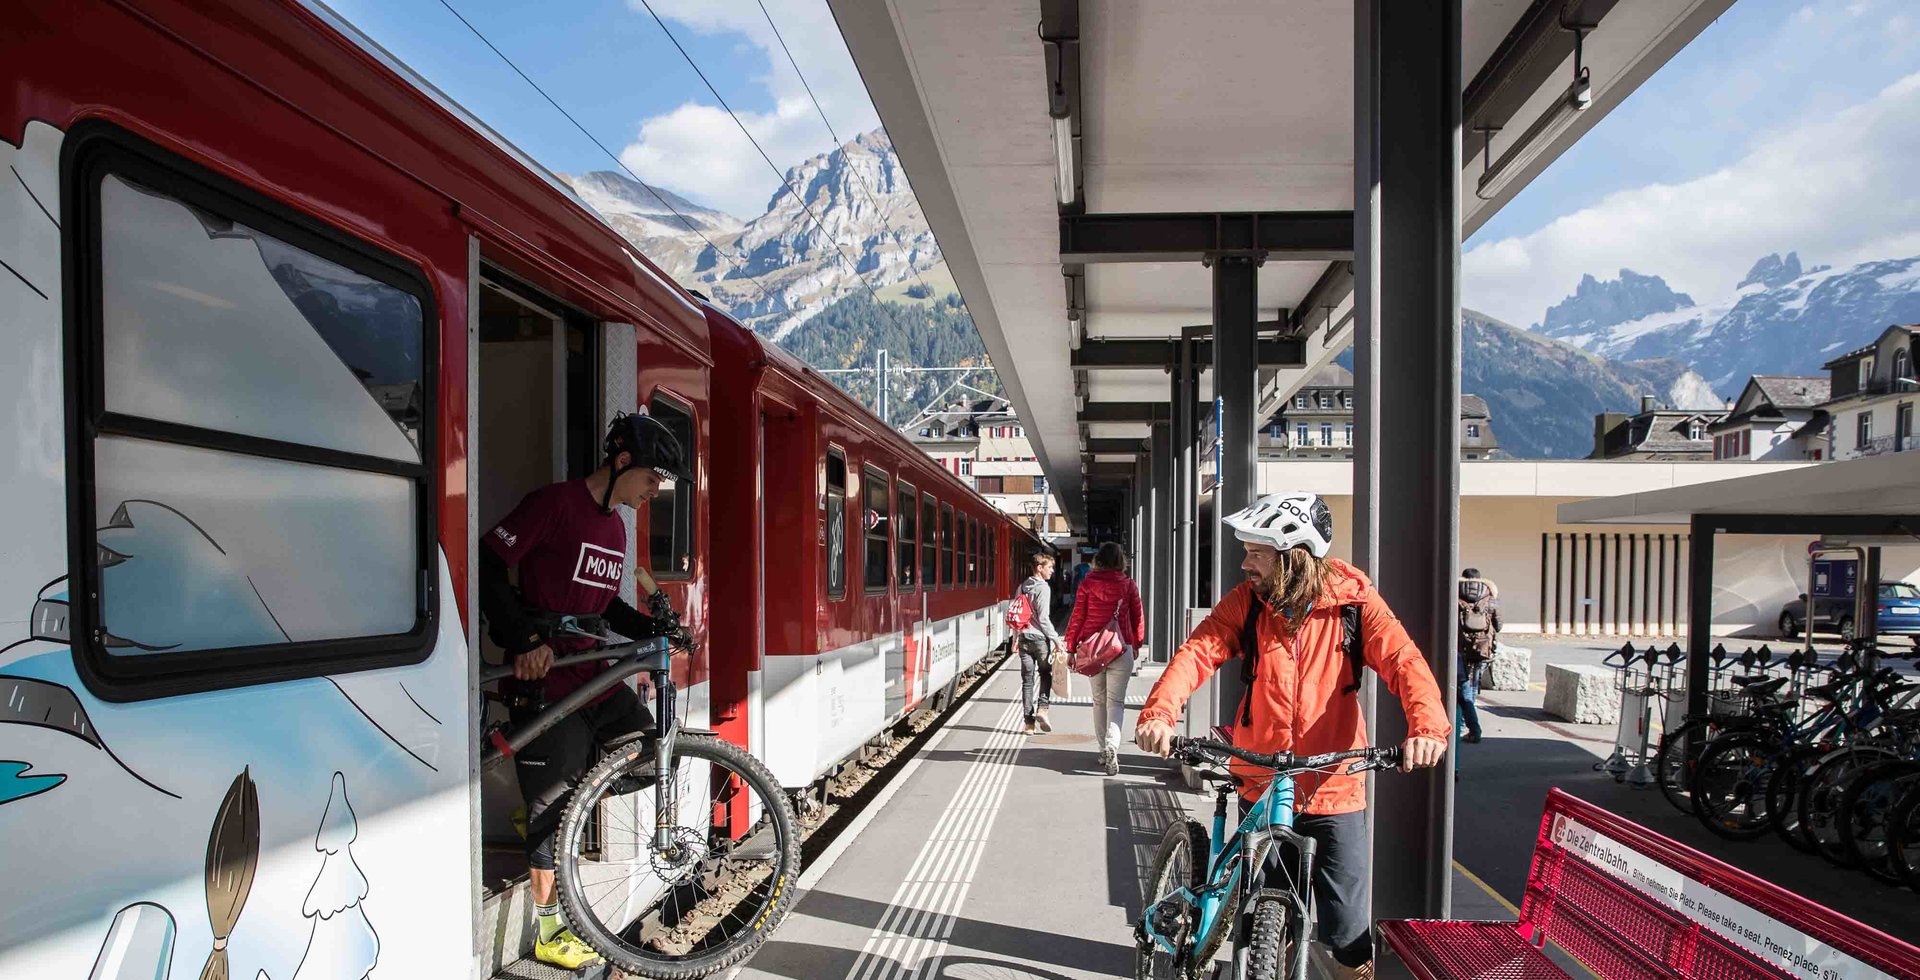 Not the average shuttle vehicle—at least by U.S. standards. Patric Bernhard steps off the train in Engelberg as he and Johan Jonsson debate whether they’ve got time for one more lap.